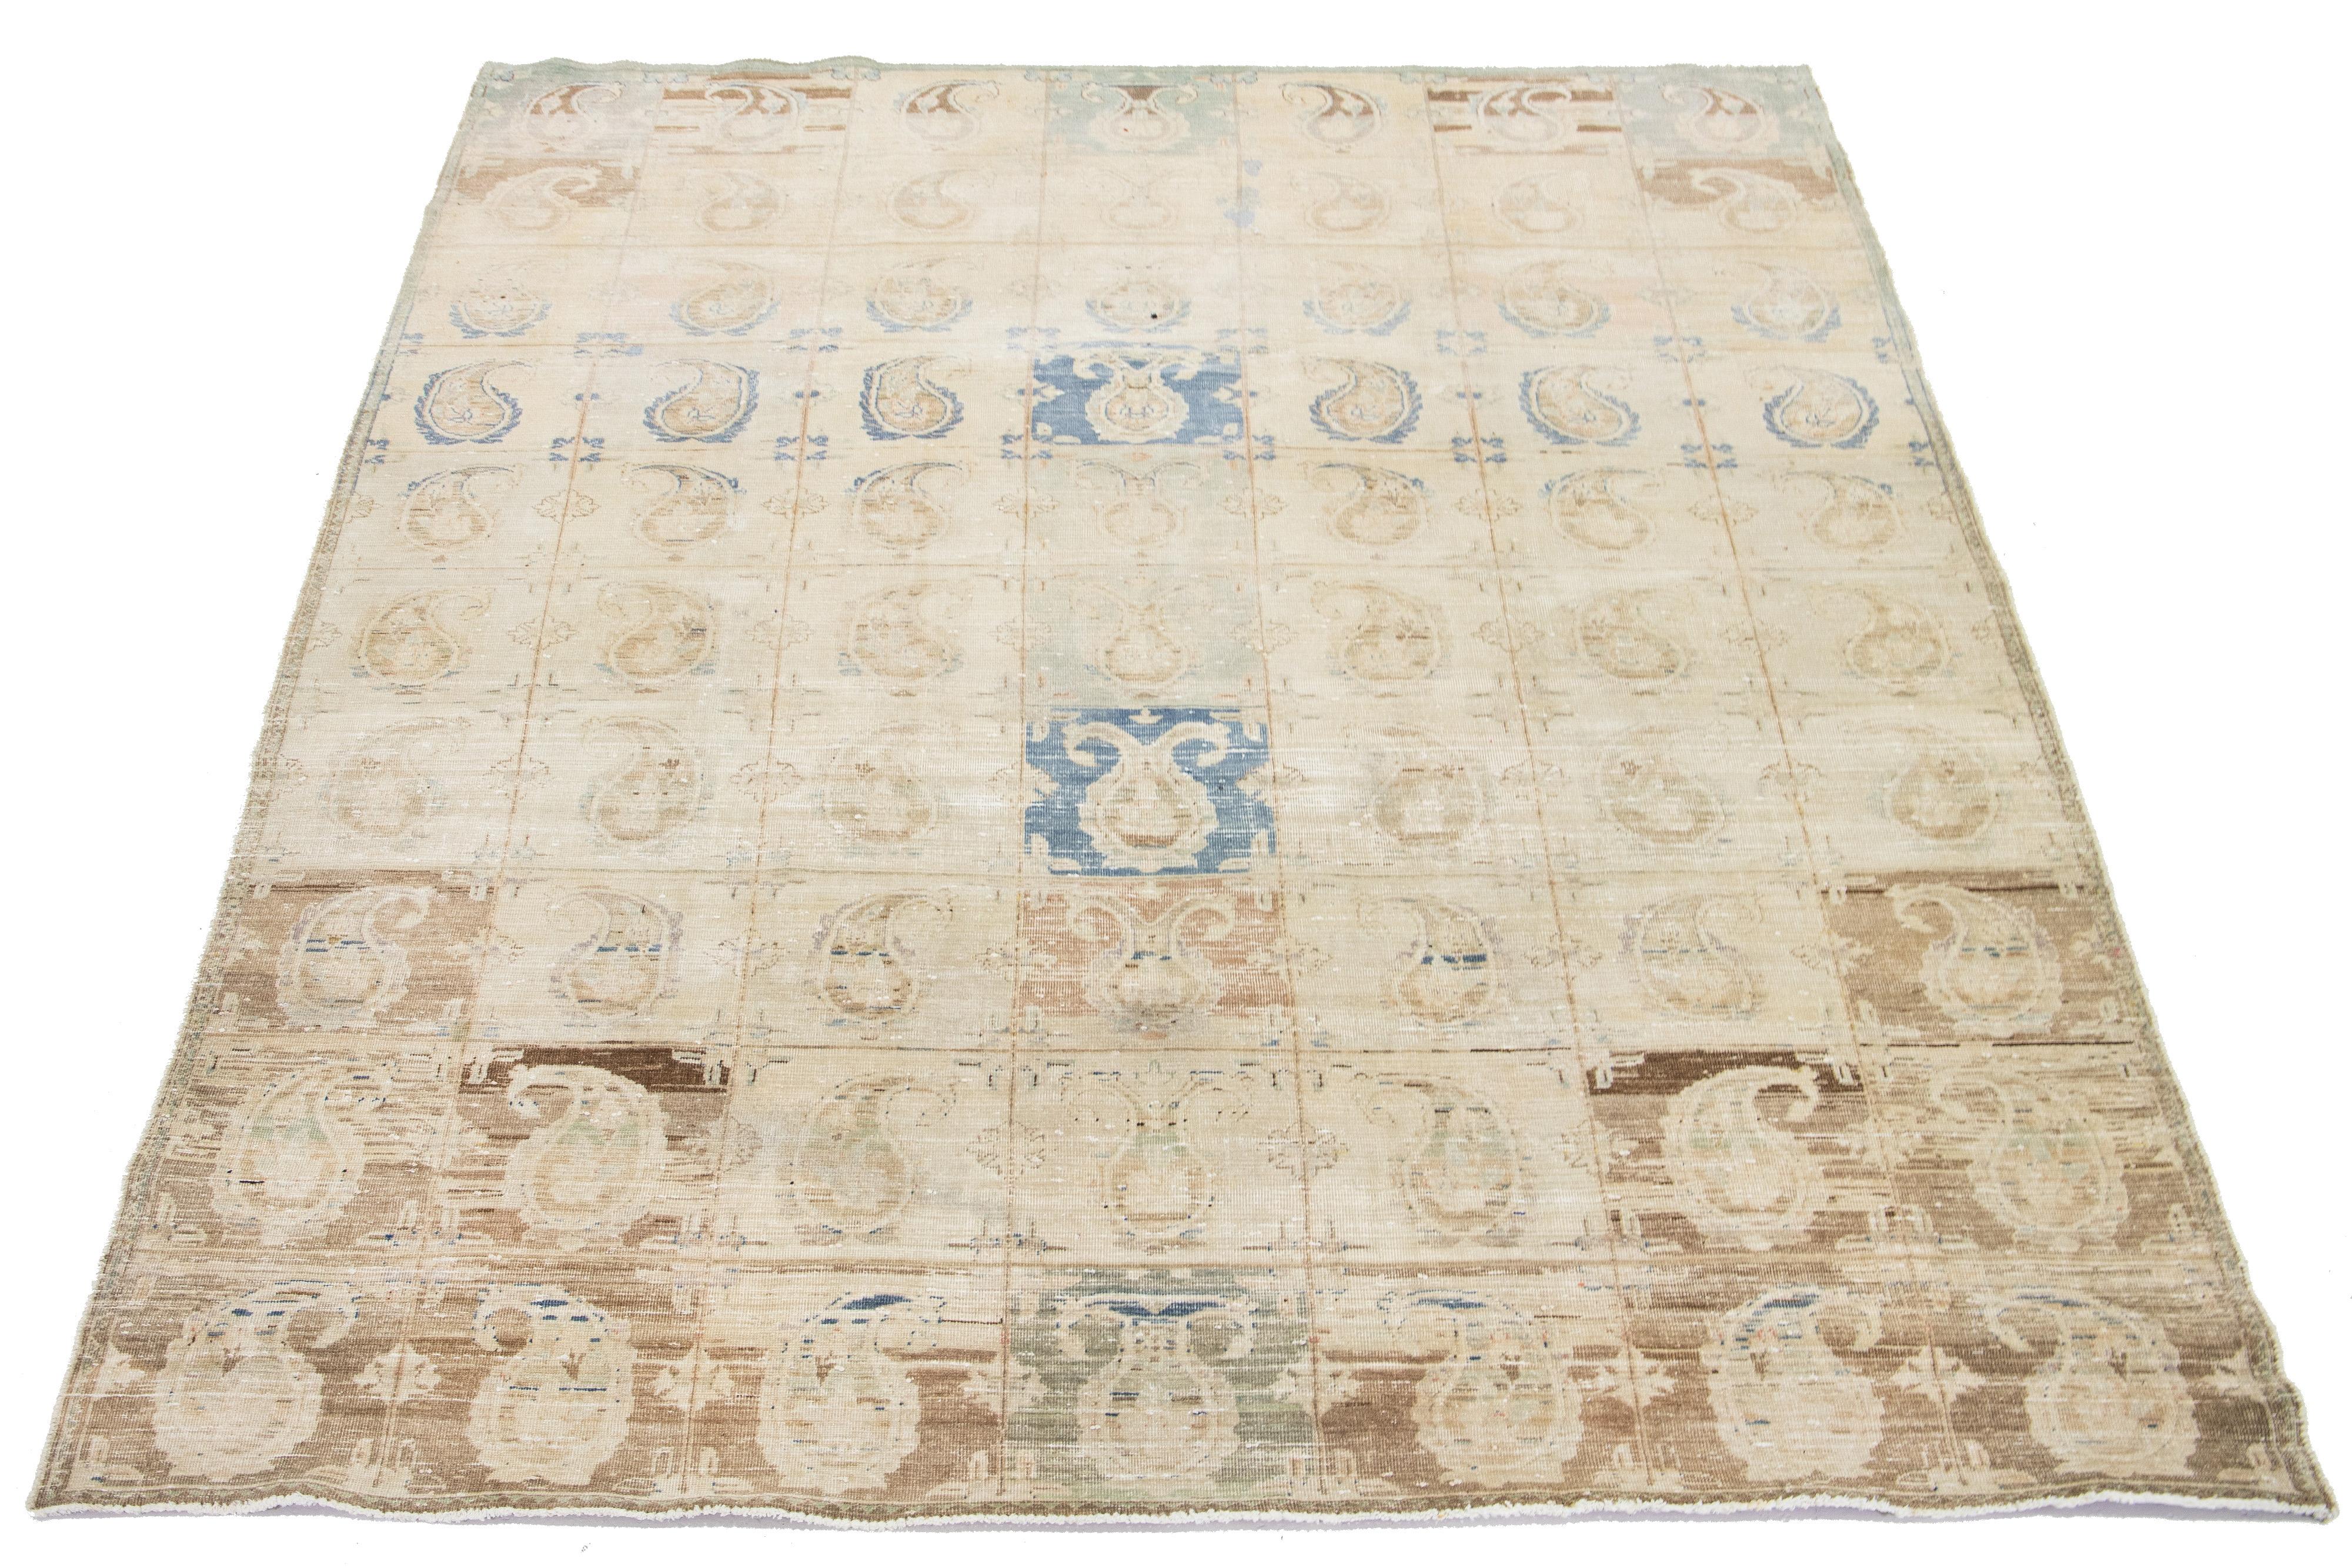 This beautifully handcrafted Persian Tabriz wool rug displays a classic all-over Boteh pattern. The beige background features shades of blue and brown.

This rug measures  8'9